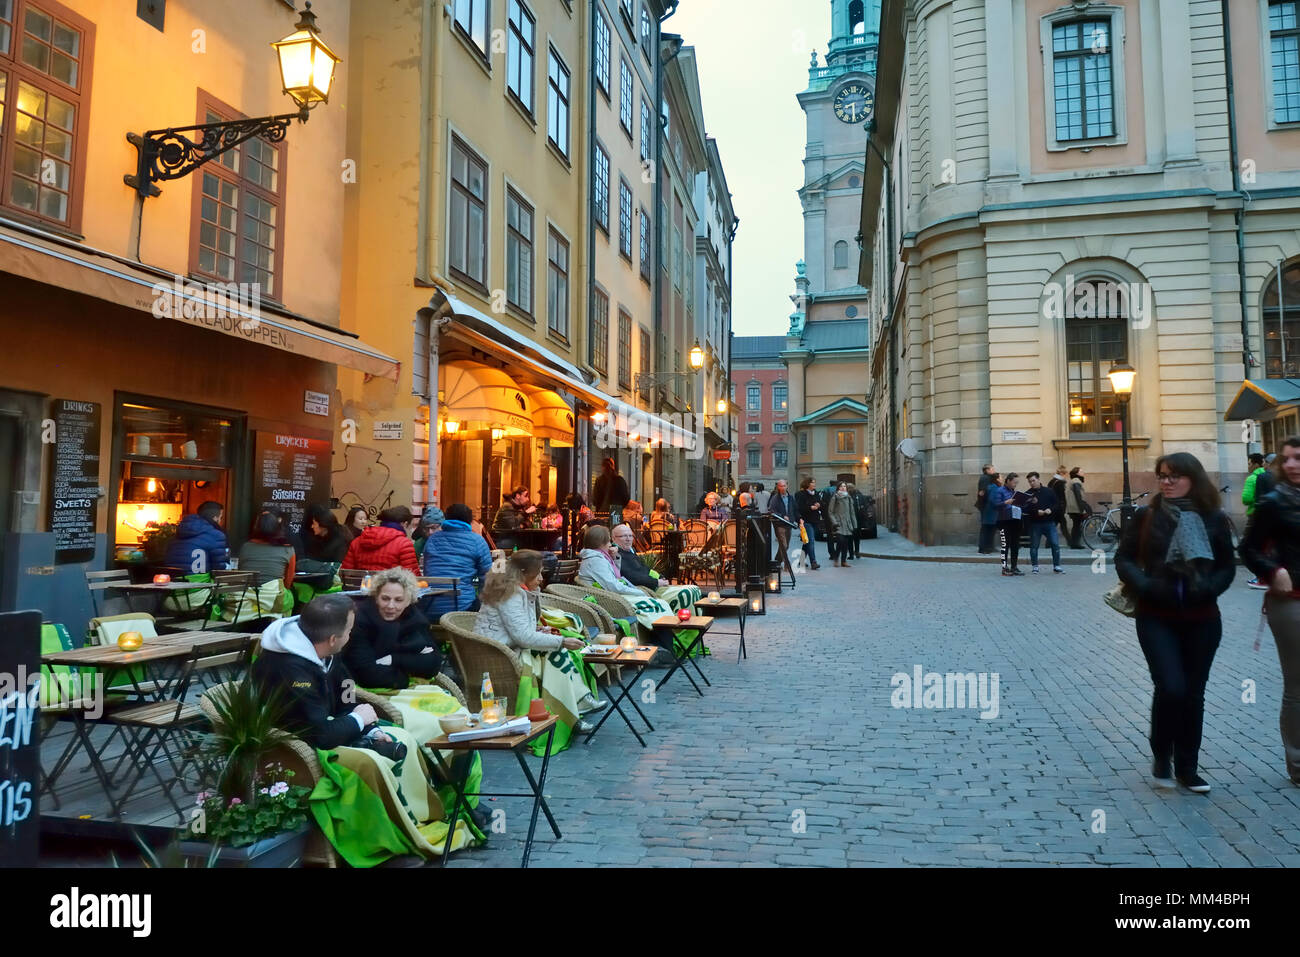 Late afternoon at Stortorget in Gamla Stan, the old town of Stockholm. Sweden Stock Photo